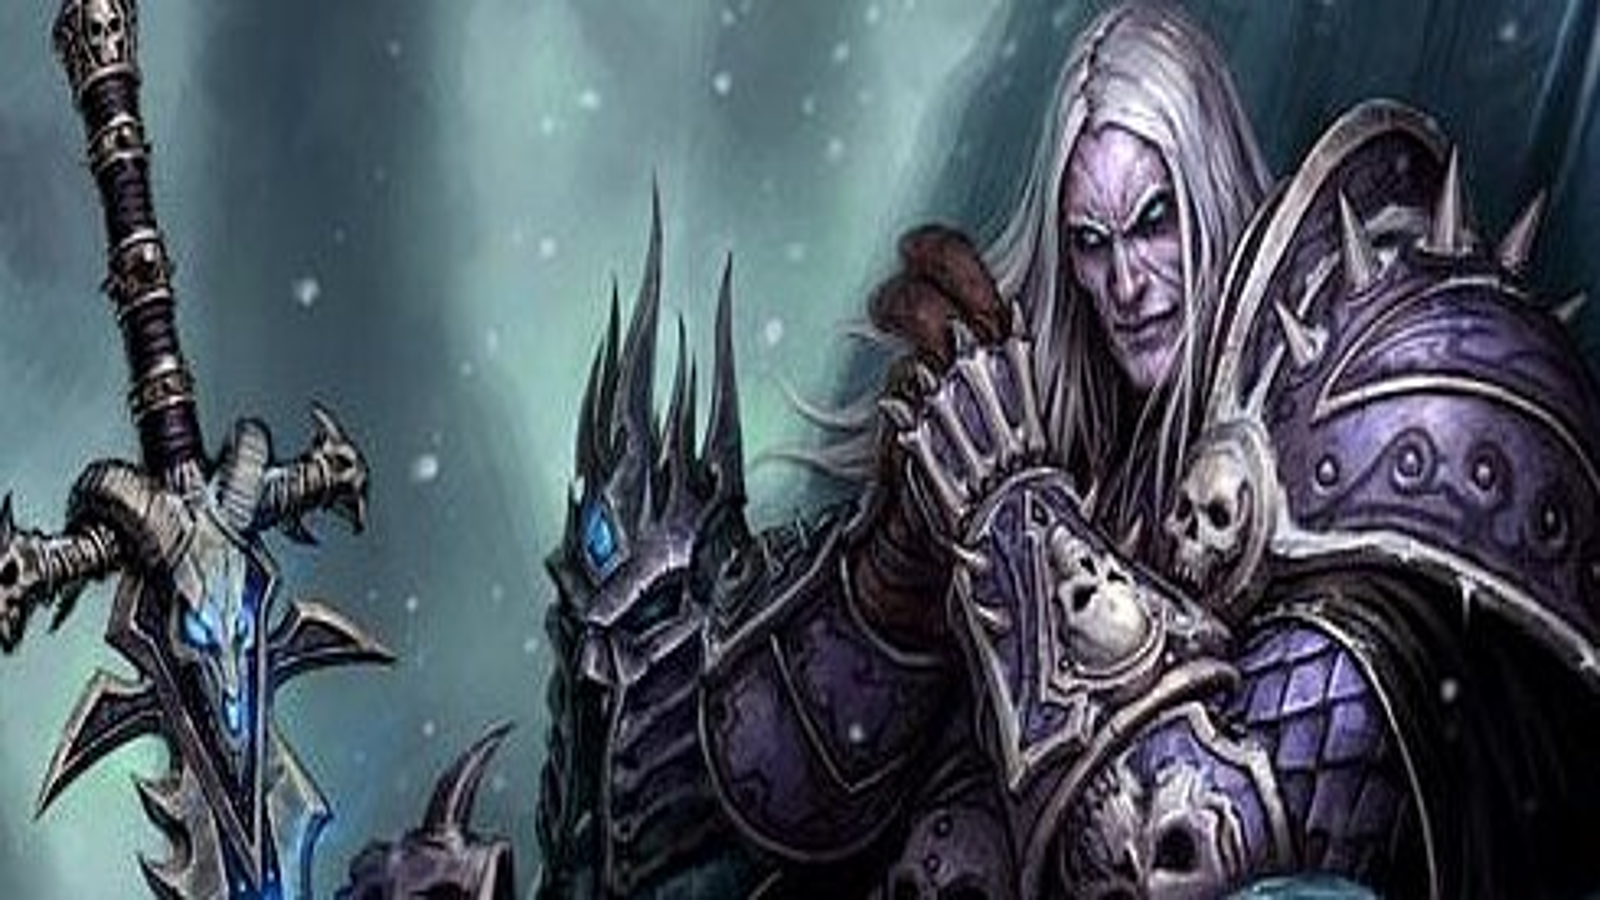 System Requirements Revealed for Wrath of the Lich King